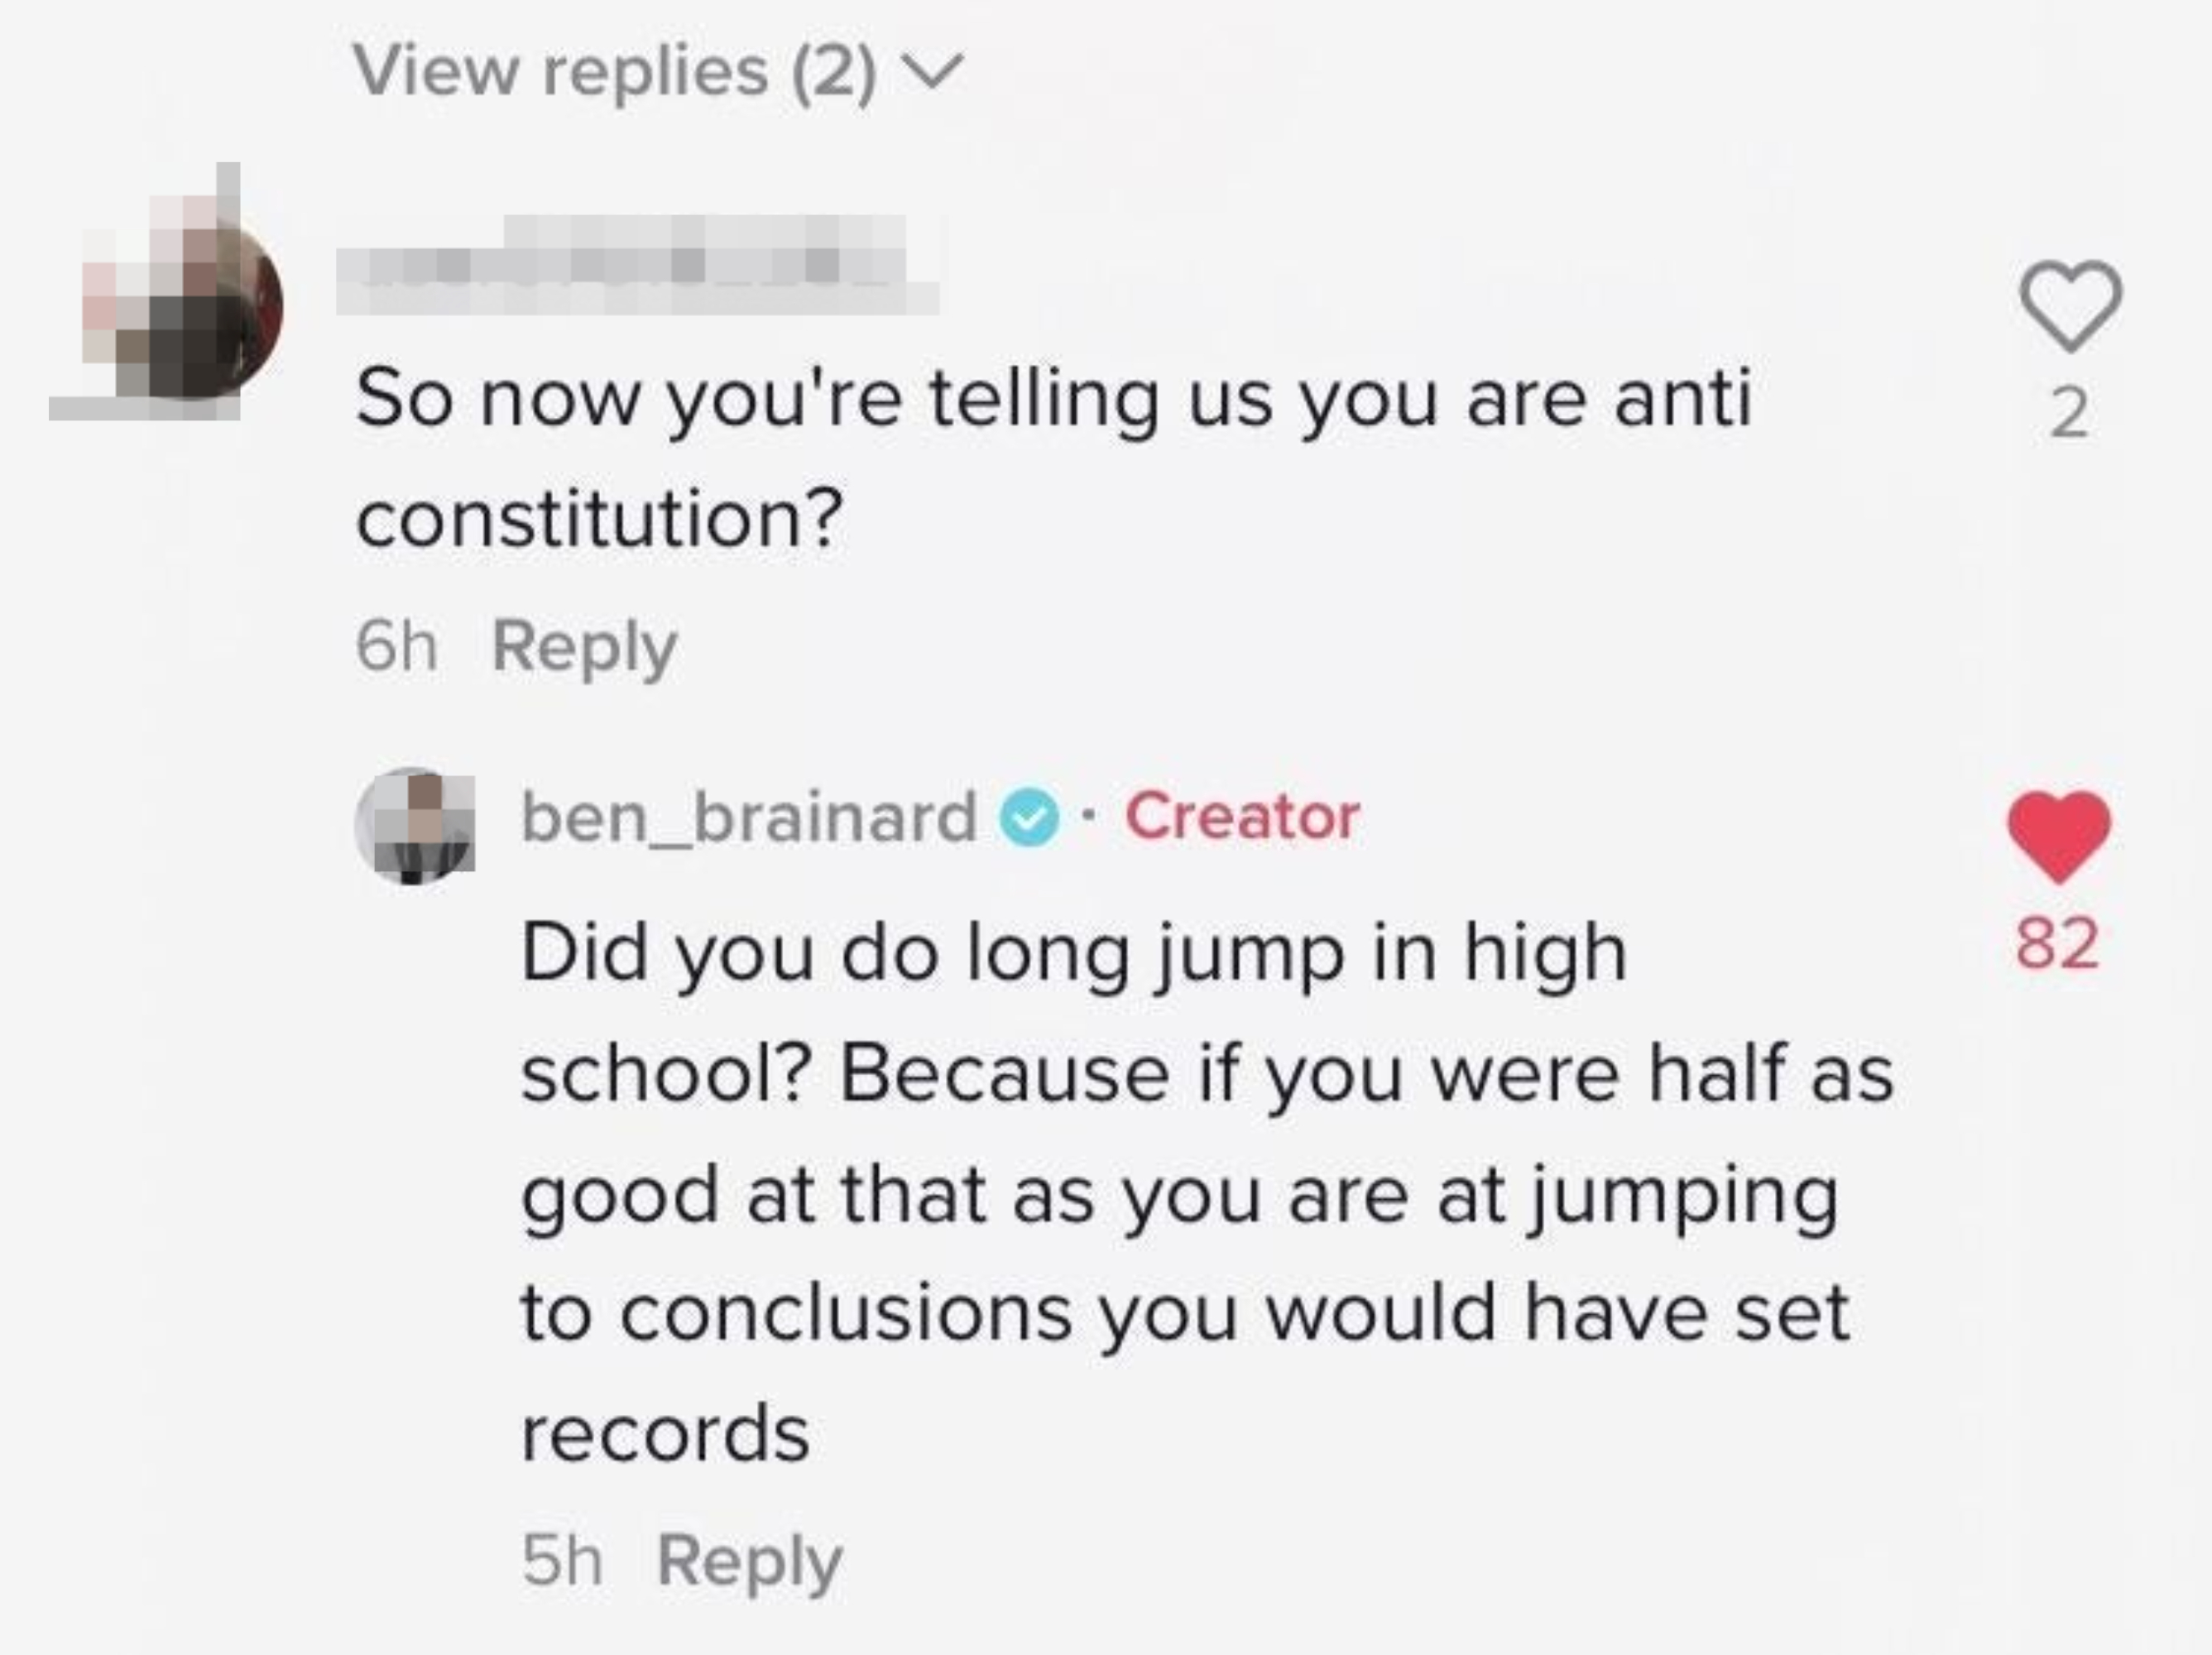 &quot;So now you&#x27;re telling us you are anti-Constitution?&quot; Response: &quot;Did you do long jump in high school? Because if you were half as good at that as you are at jumping to conclusions, you would have set records&quot;